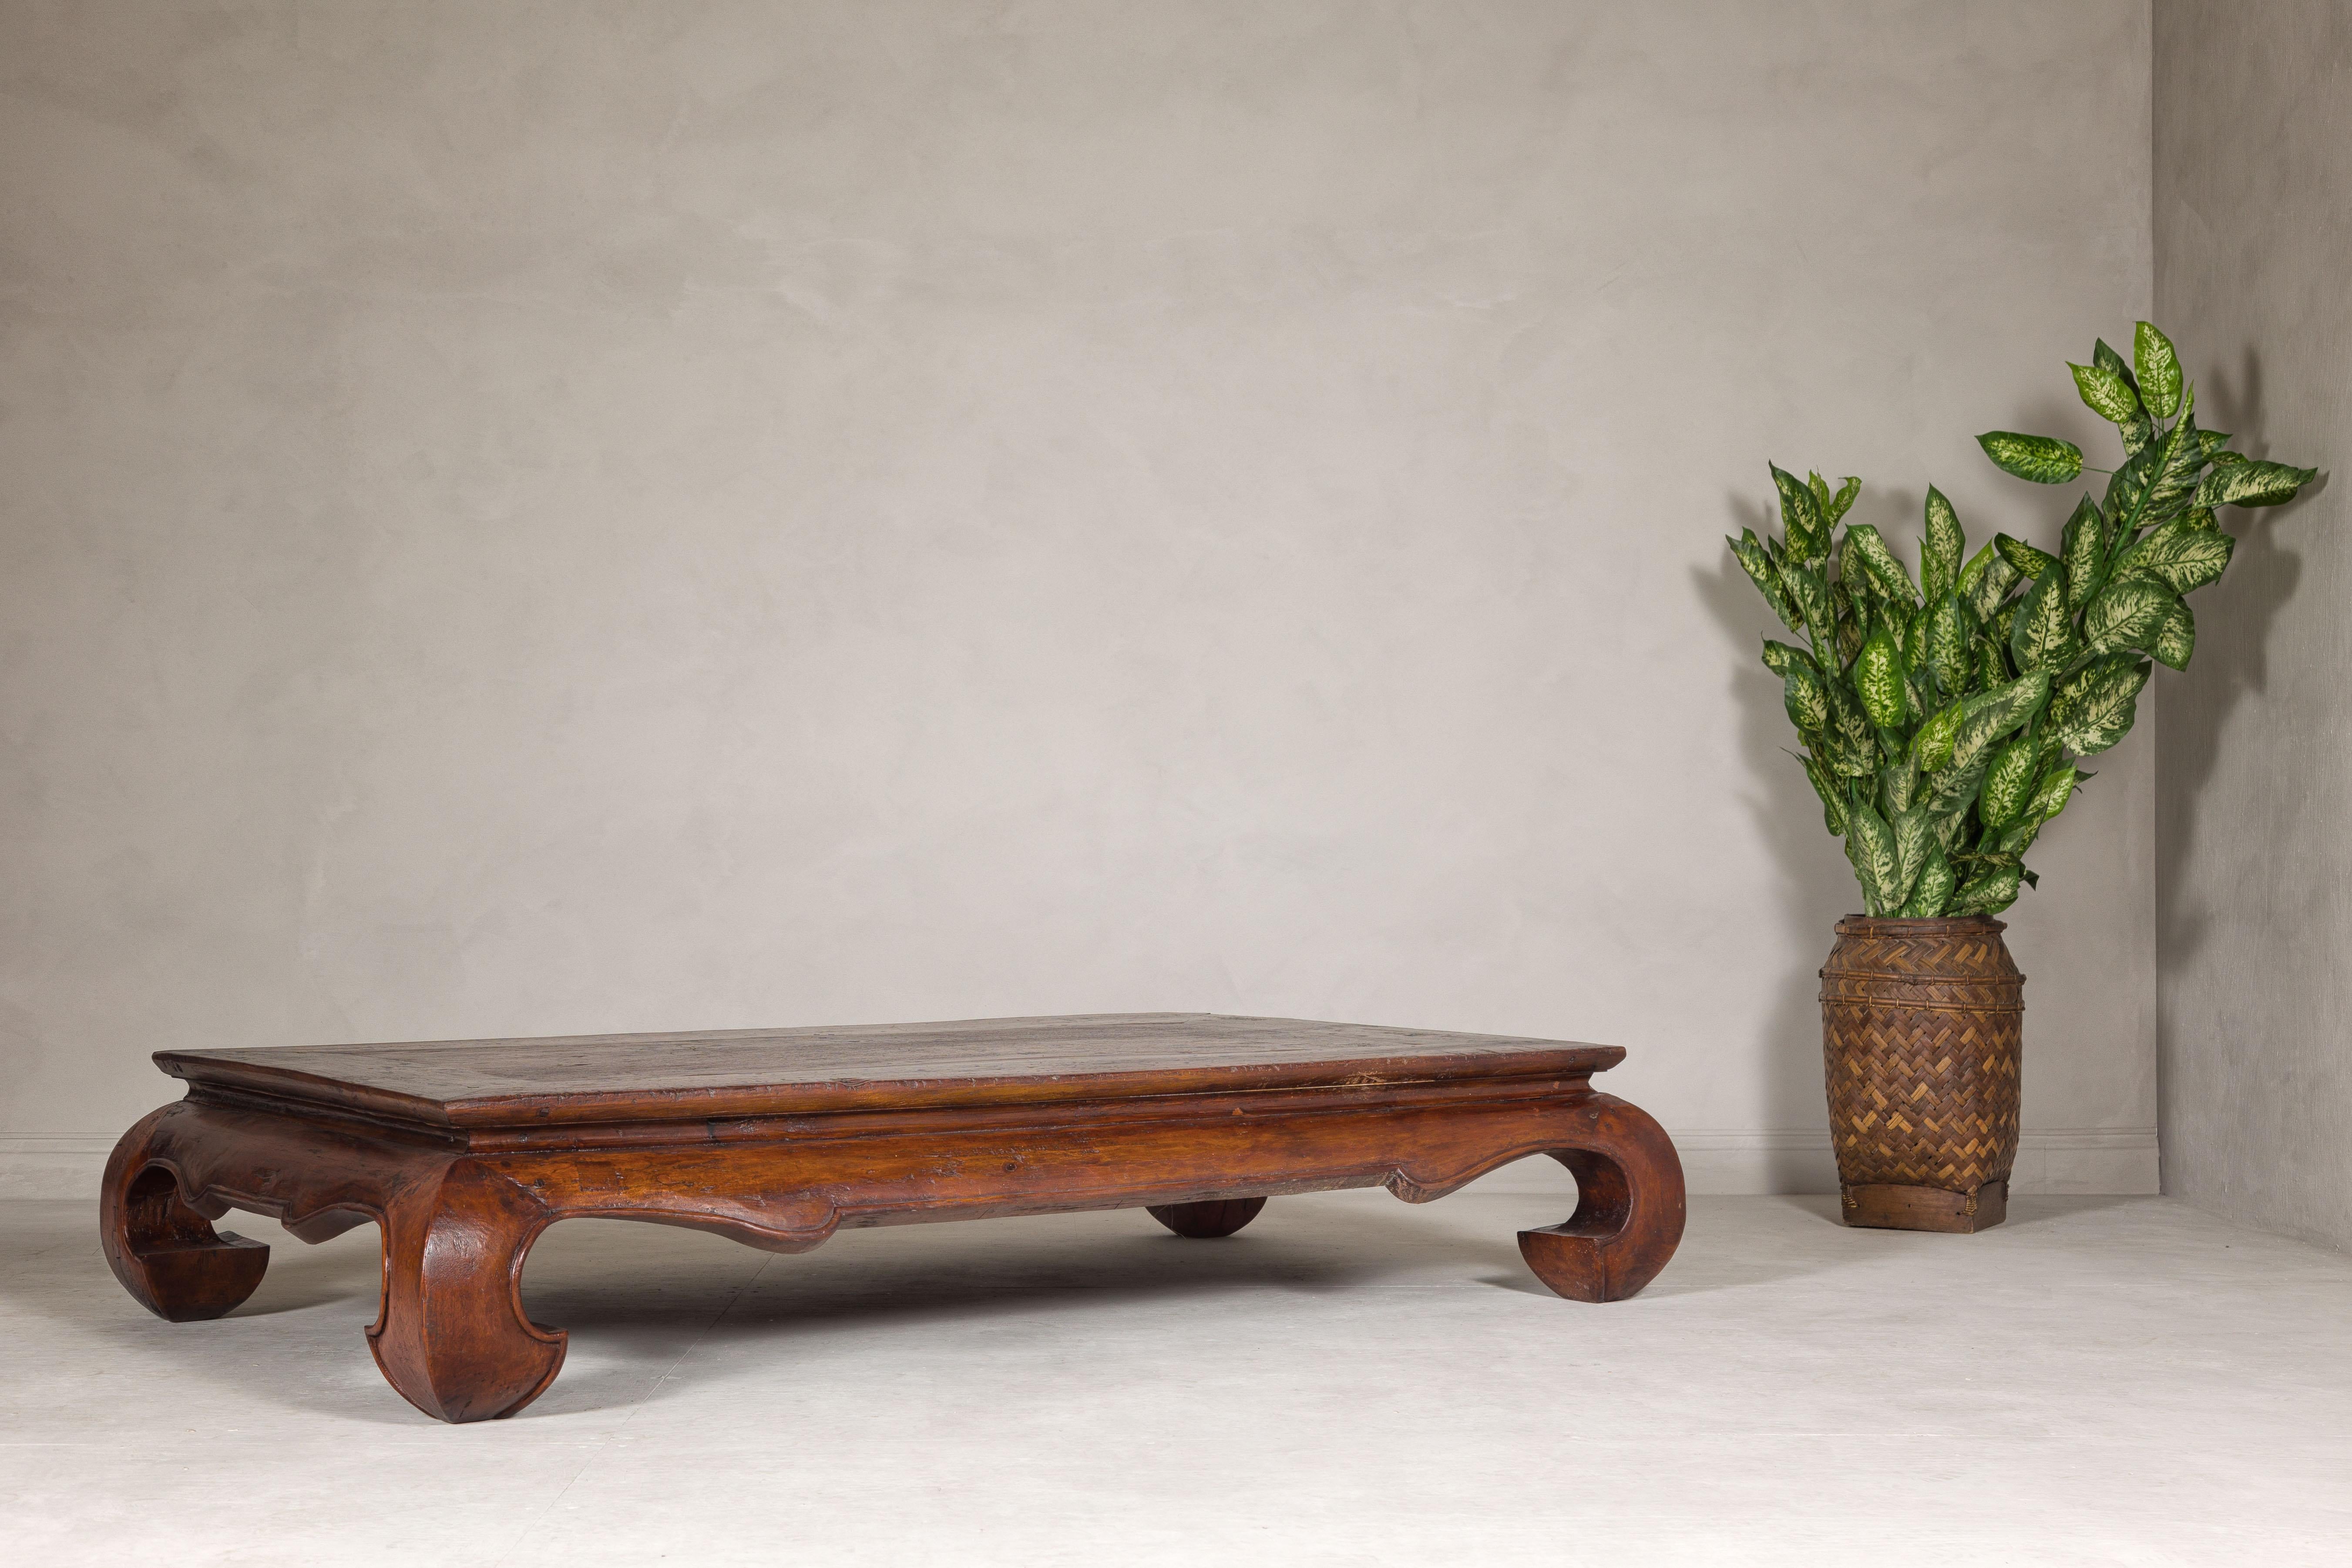 Qing Dynasty 19th Century Chow Leg Kang Table with Weathered Rustic Patina For Sale 5